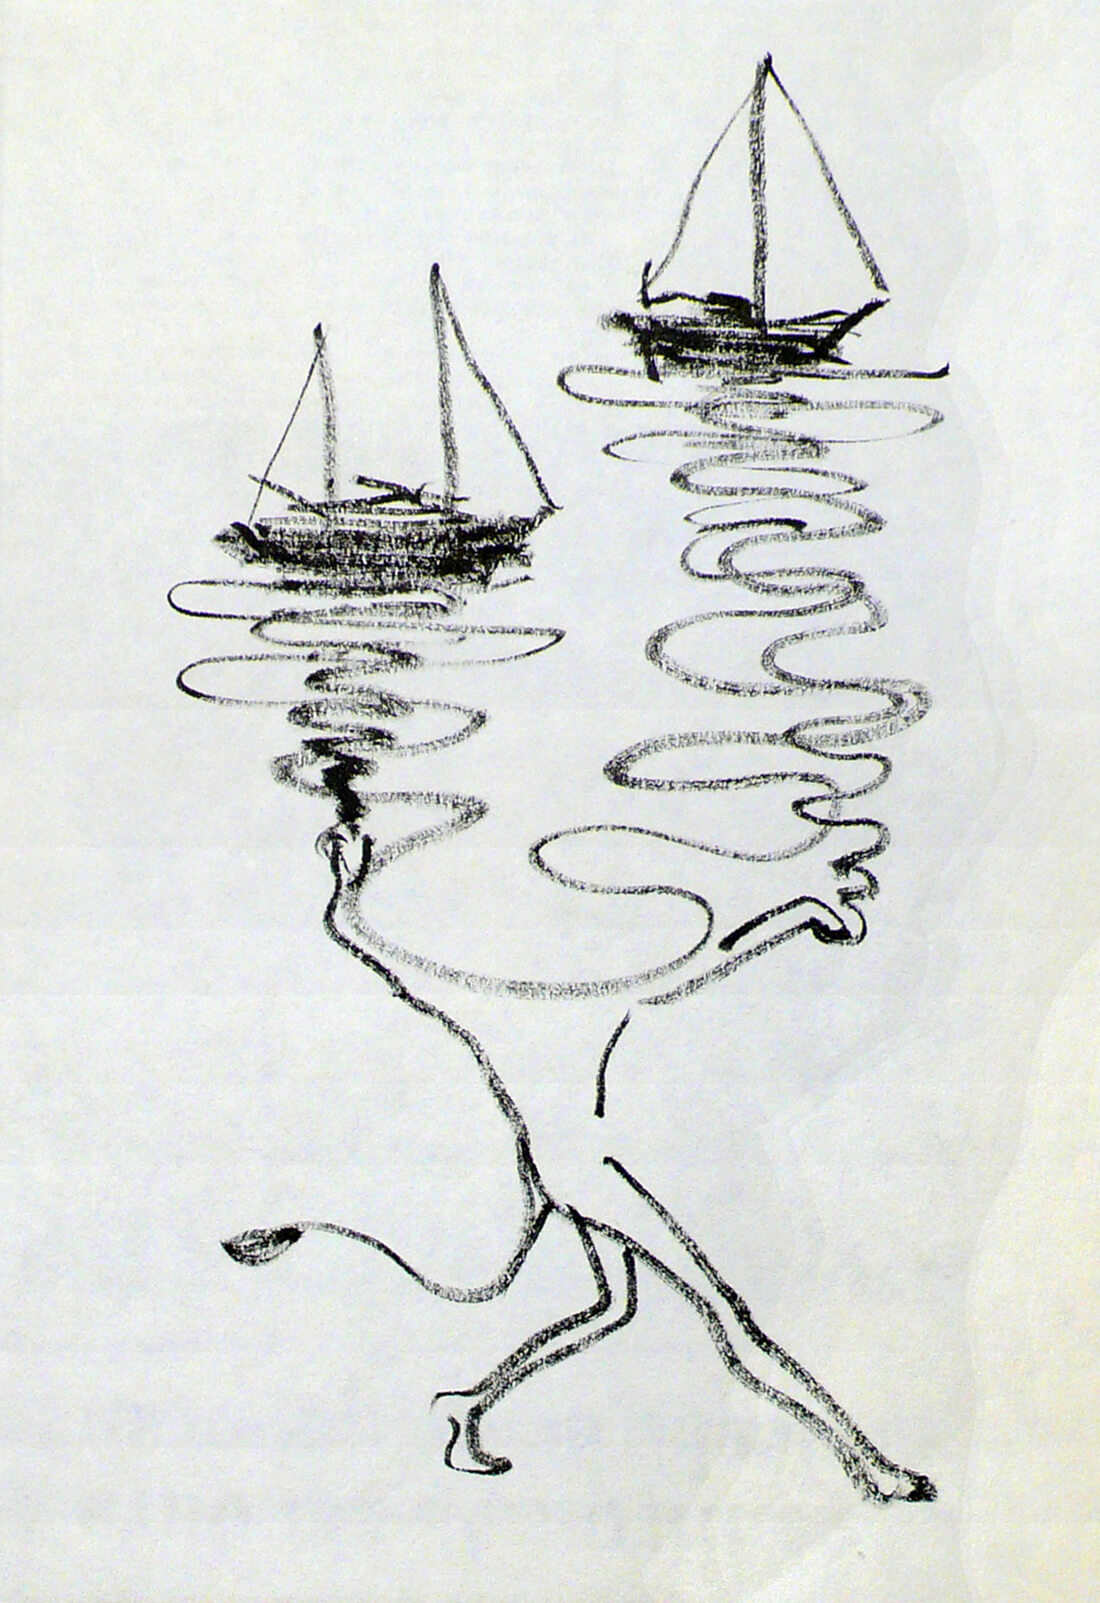 untitled (sailing boats), 23 x 14 cm, ink on paper, 2004